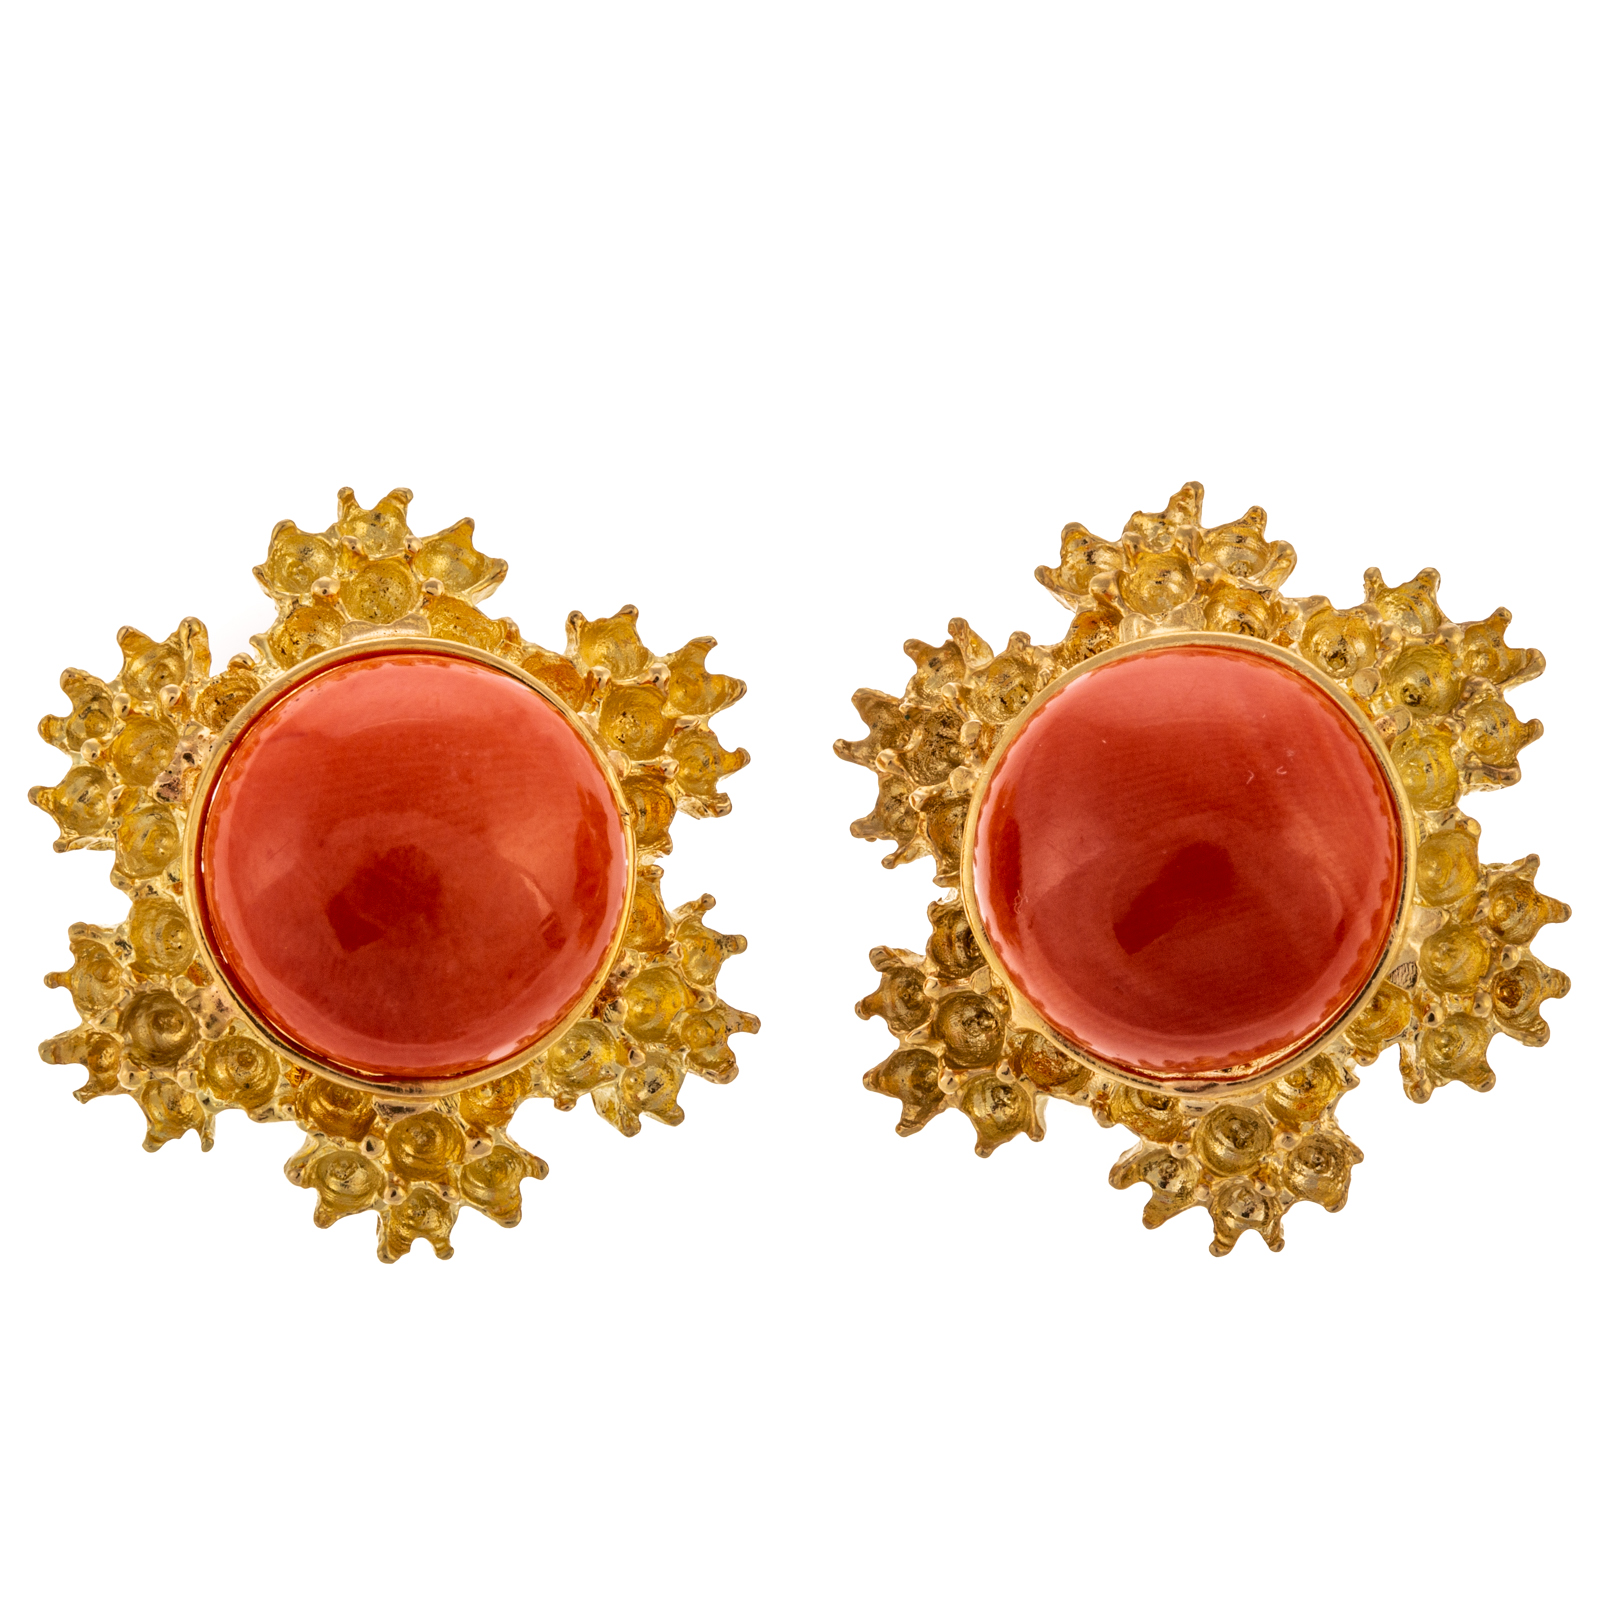 A PAIR OF FINE CORAL CLIP EARRINGS